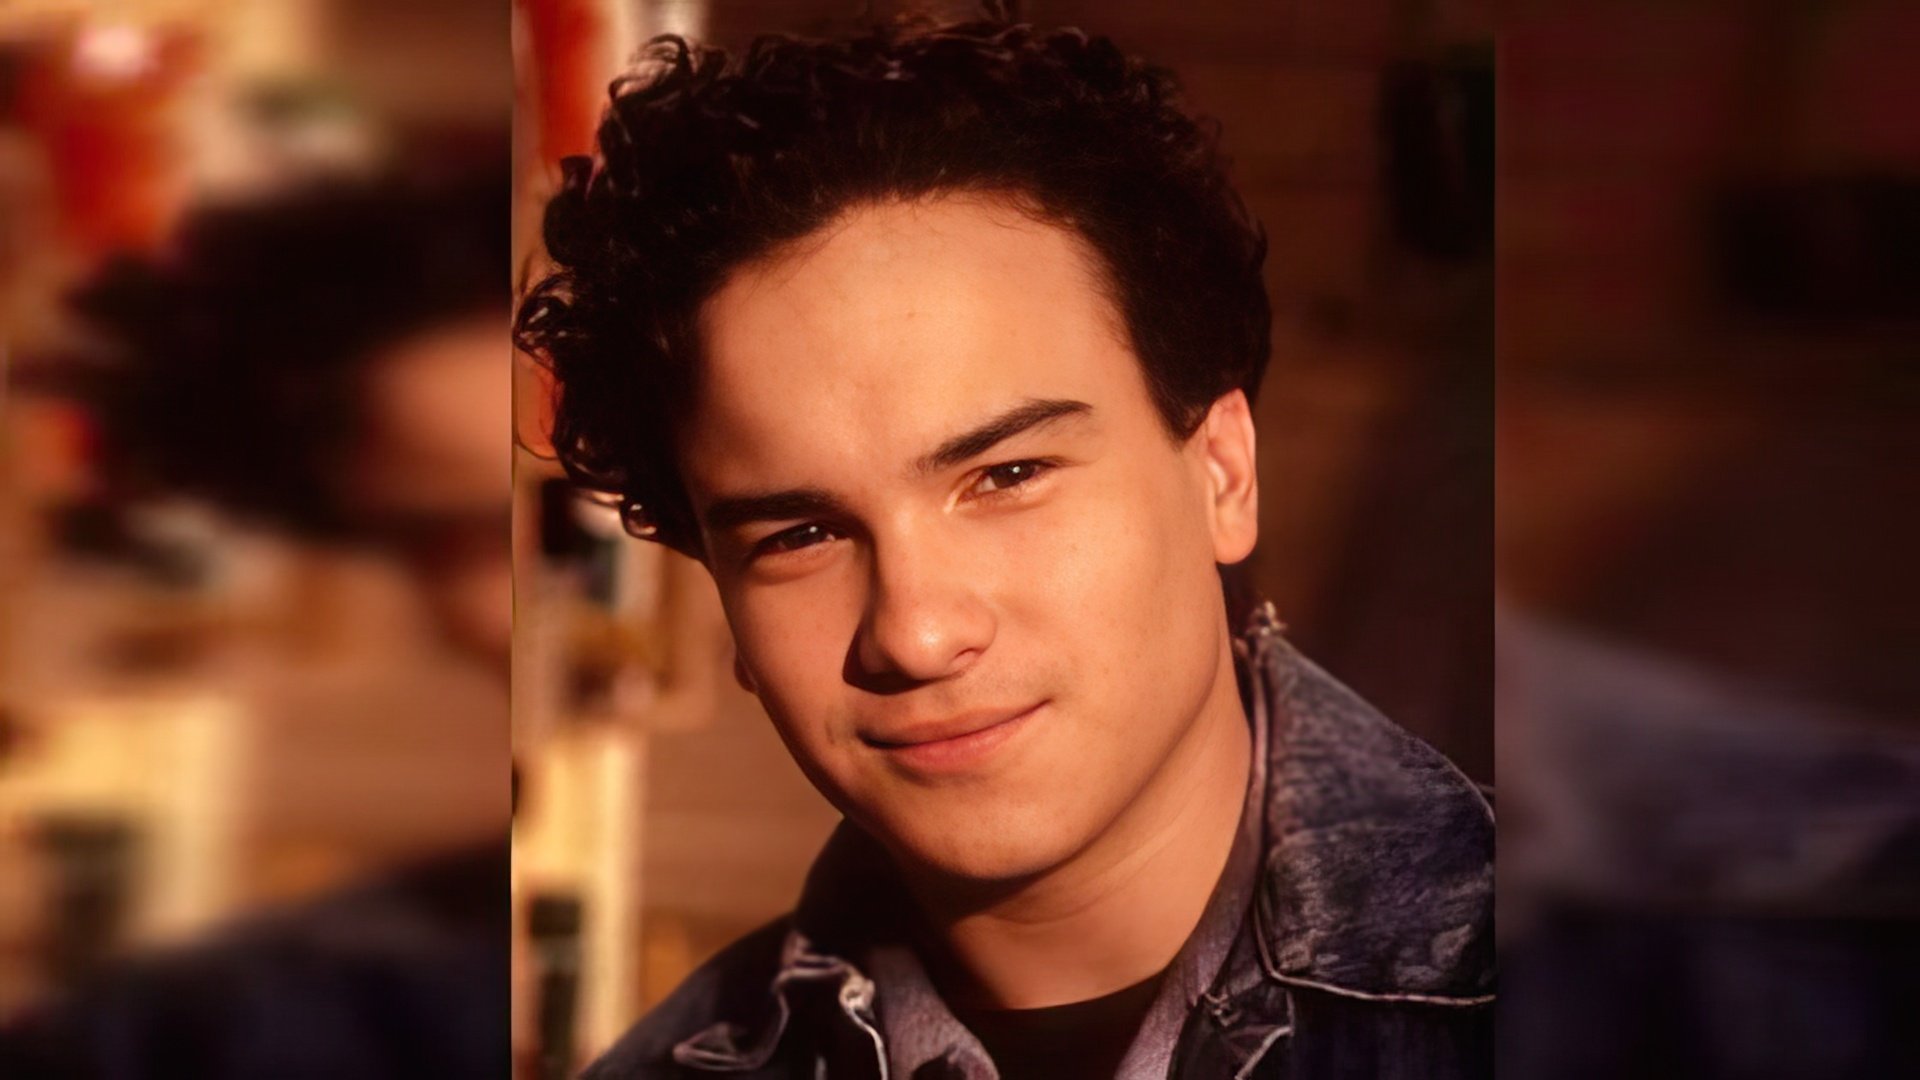 Johnny Galecki in his youth